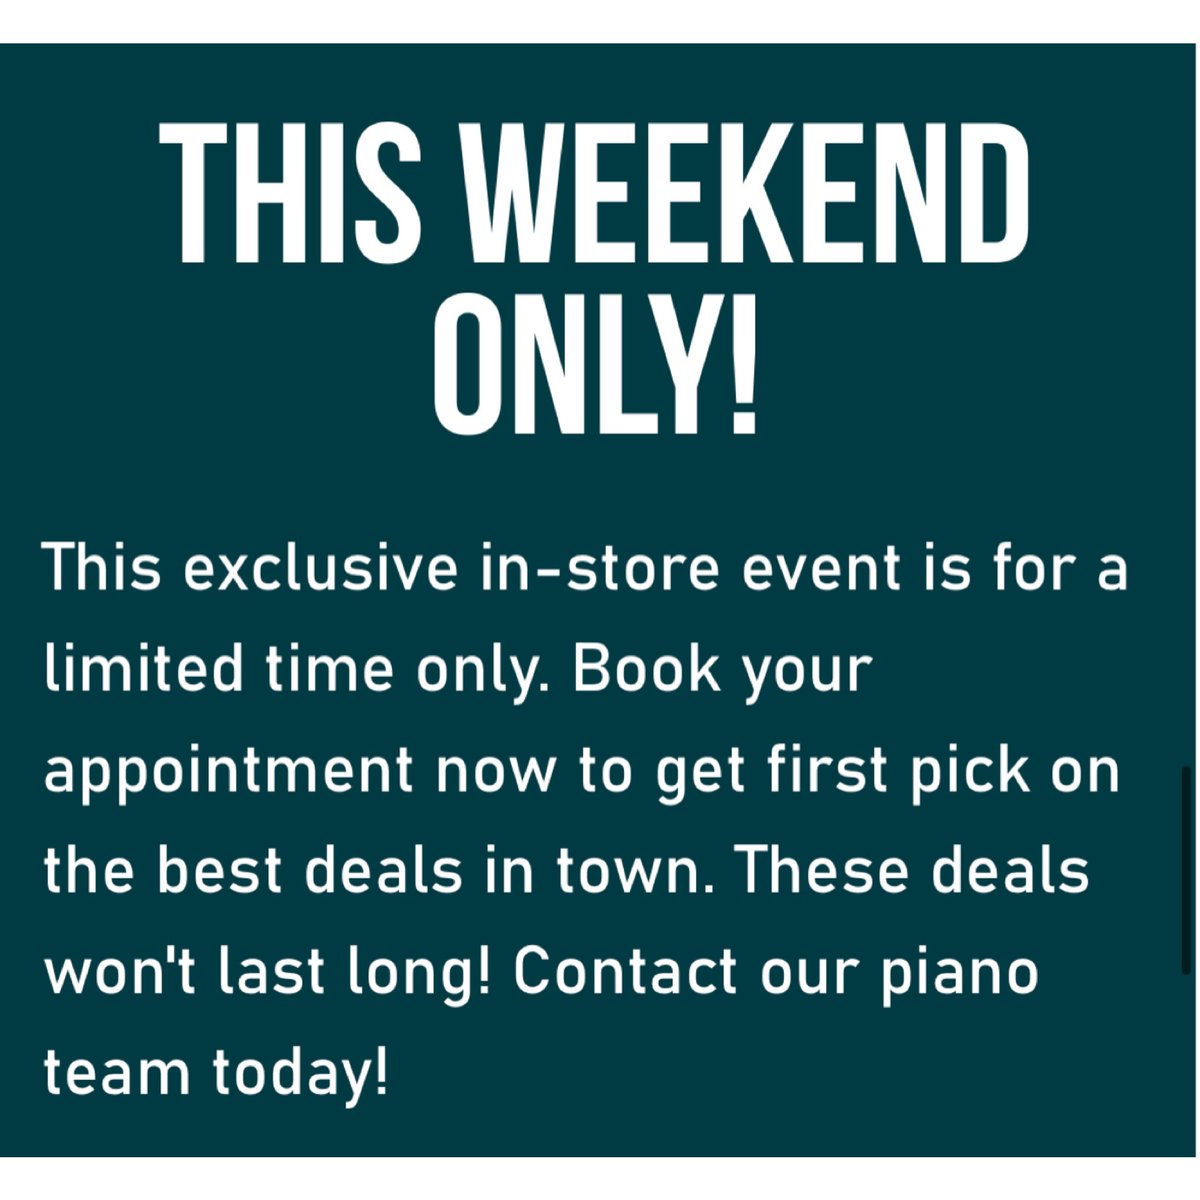 ⚠️THIS WEEKEND ONLY⚠️ Spring is here! That means it's time for our annual Spring Piano Sale! For a limited time you can take advantage of HUGE discounts on a great selection of acoustic upright and grand pianos! . Book your appointment online today: straitmusic.com/t-spring-piano…